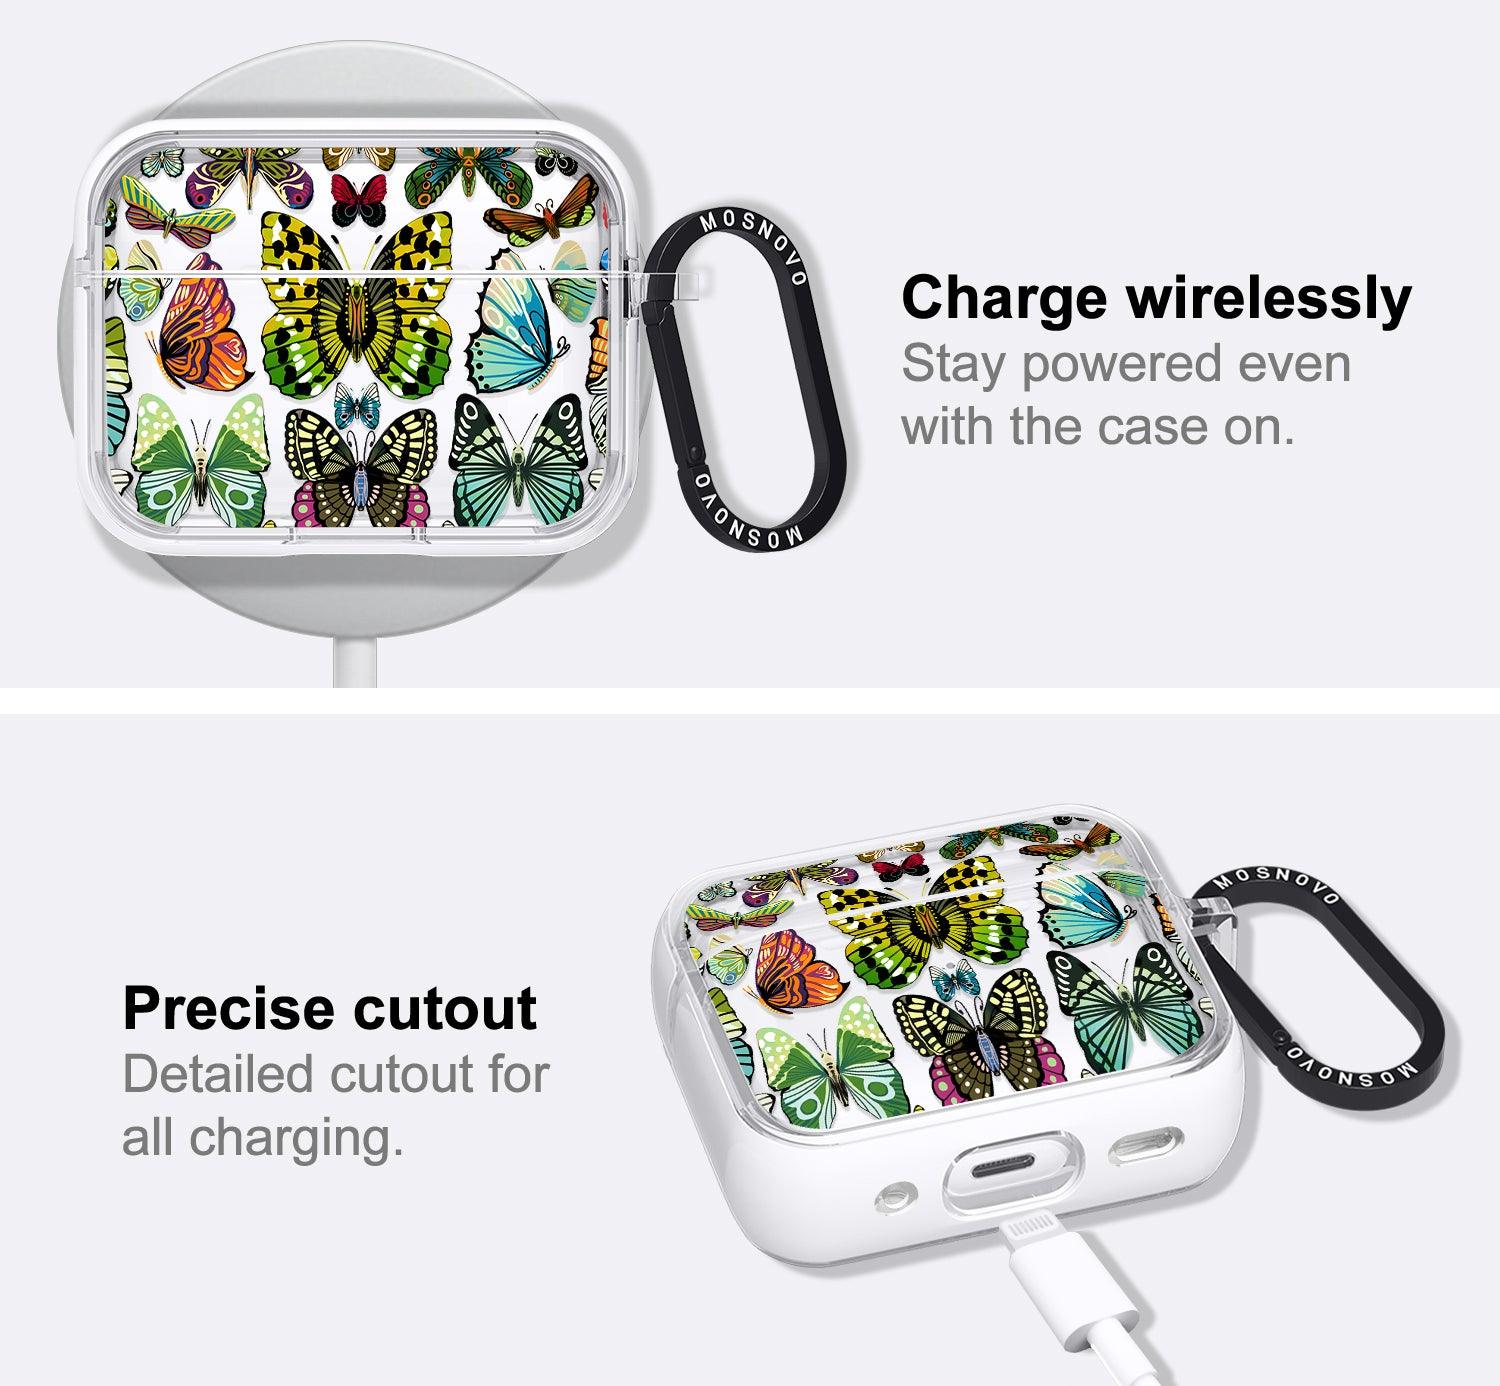 Butterflies AirPods Pro 2 Case (2nd Generation) - MOSNOVO